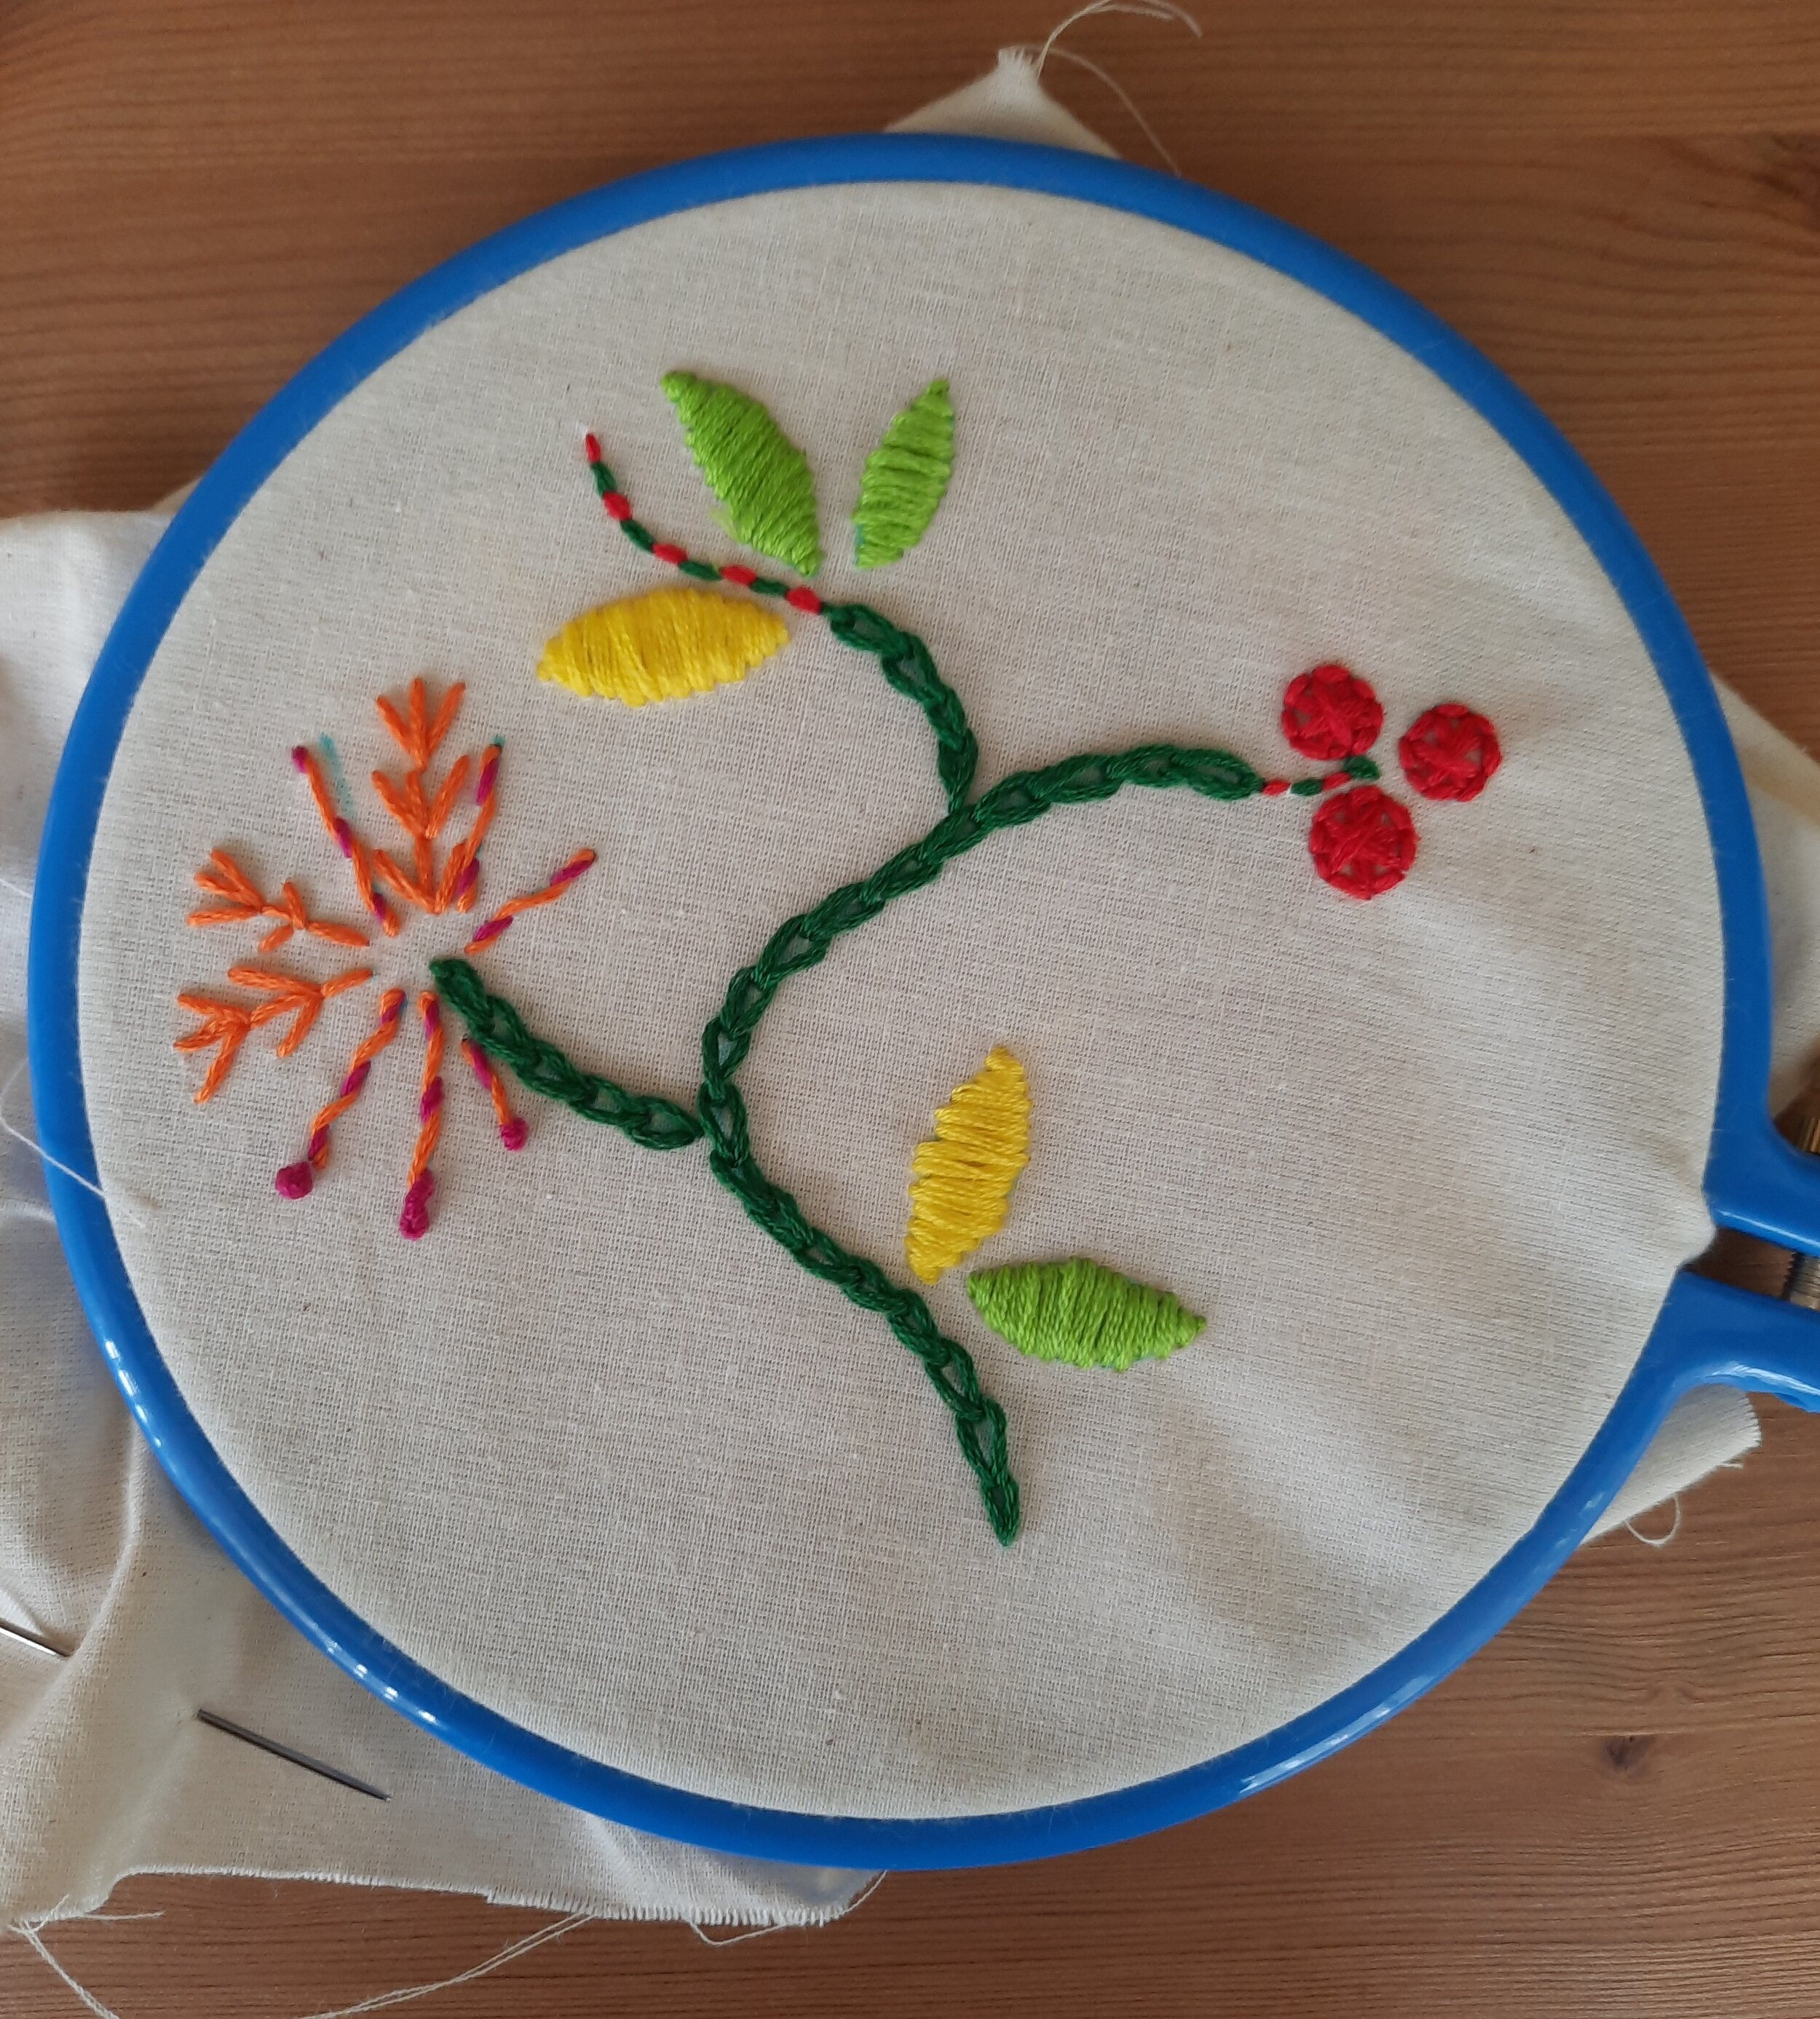 participant embroidery 2.jpg